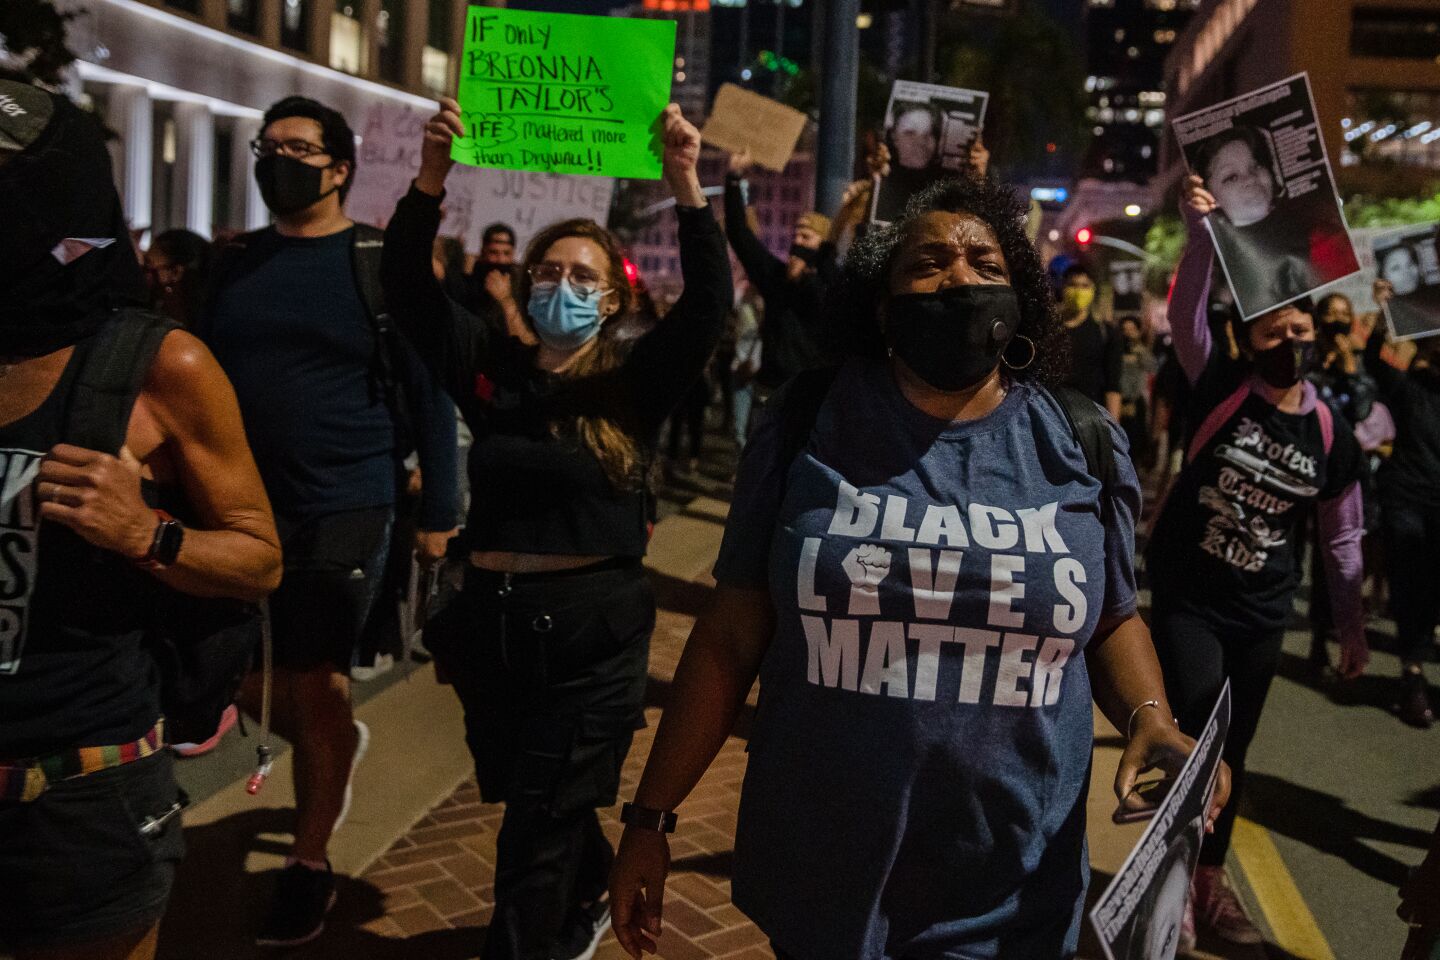 Protesters march through the streets of downtown San Diego on September 23, 2020 after a grand jury in Kentucky declined to bring homicide charges against officers in the death of Breonna Taylor.